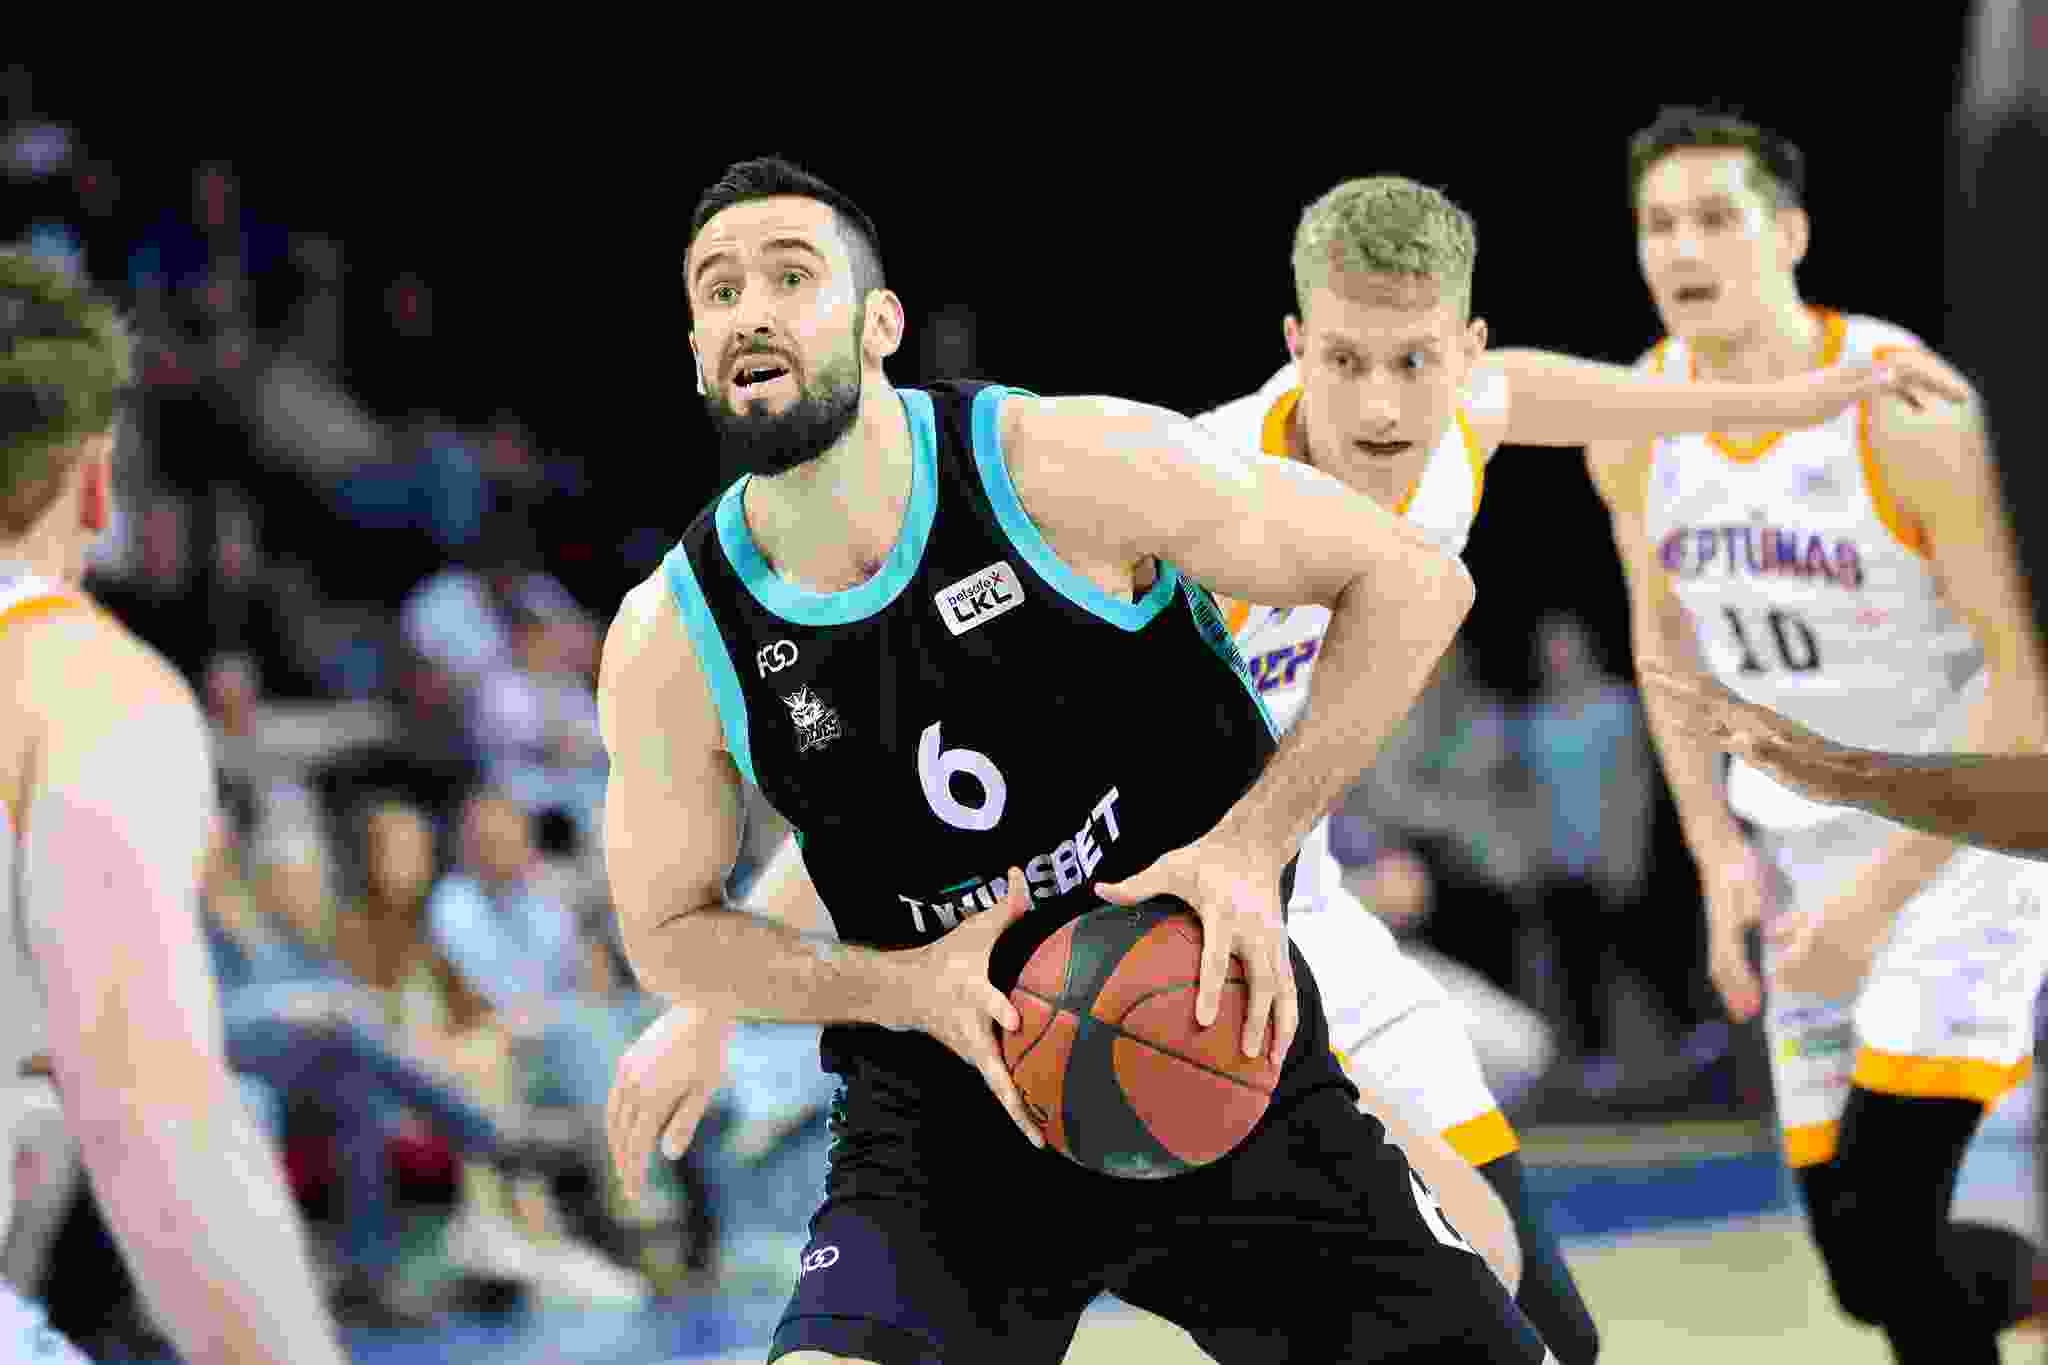 Wolves Twinsbet lose Game 2 in Klaipeda, quarter-final series to be decided in Vilnius